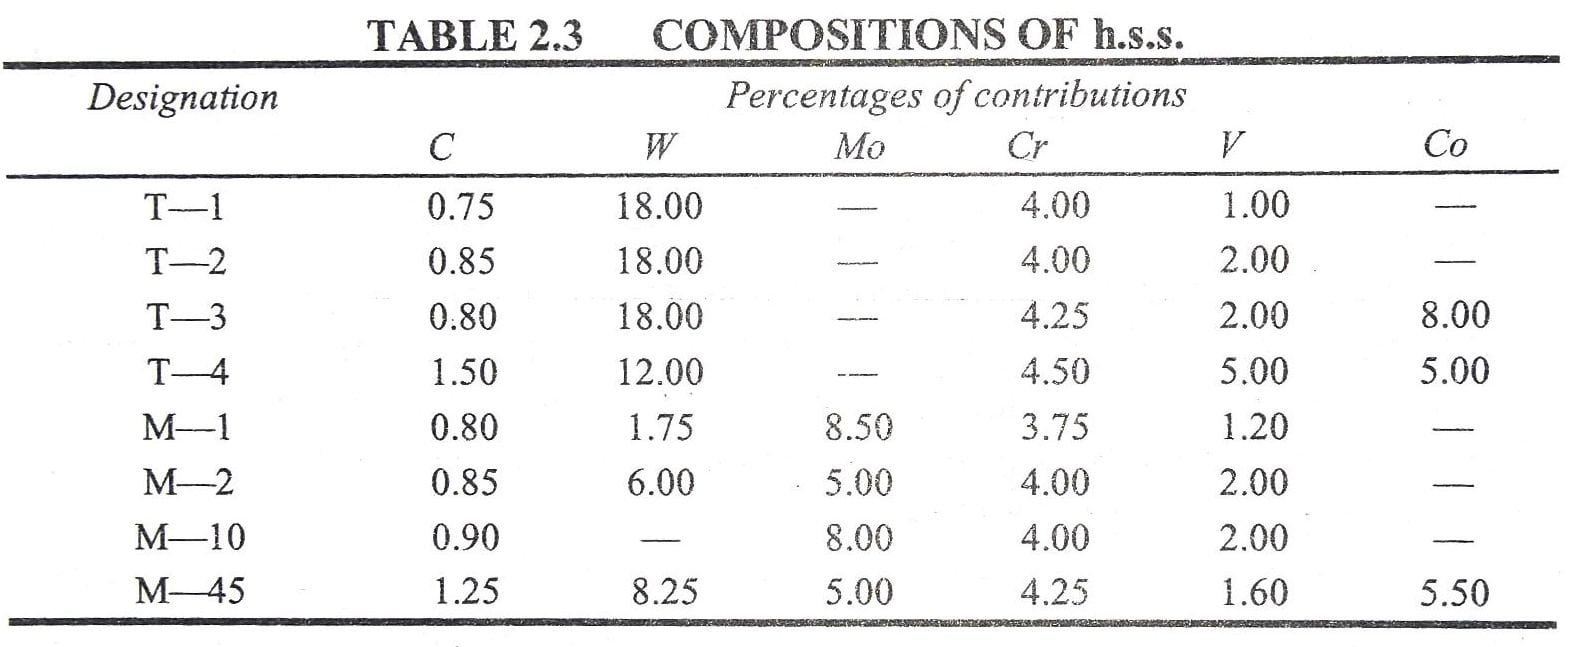 Composition of High Speed Steel HSS